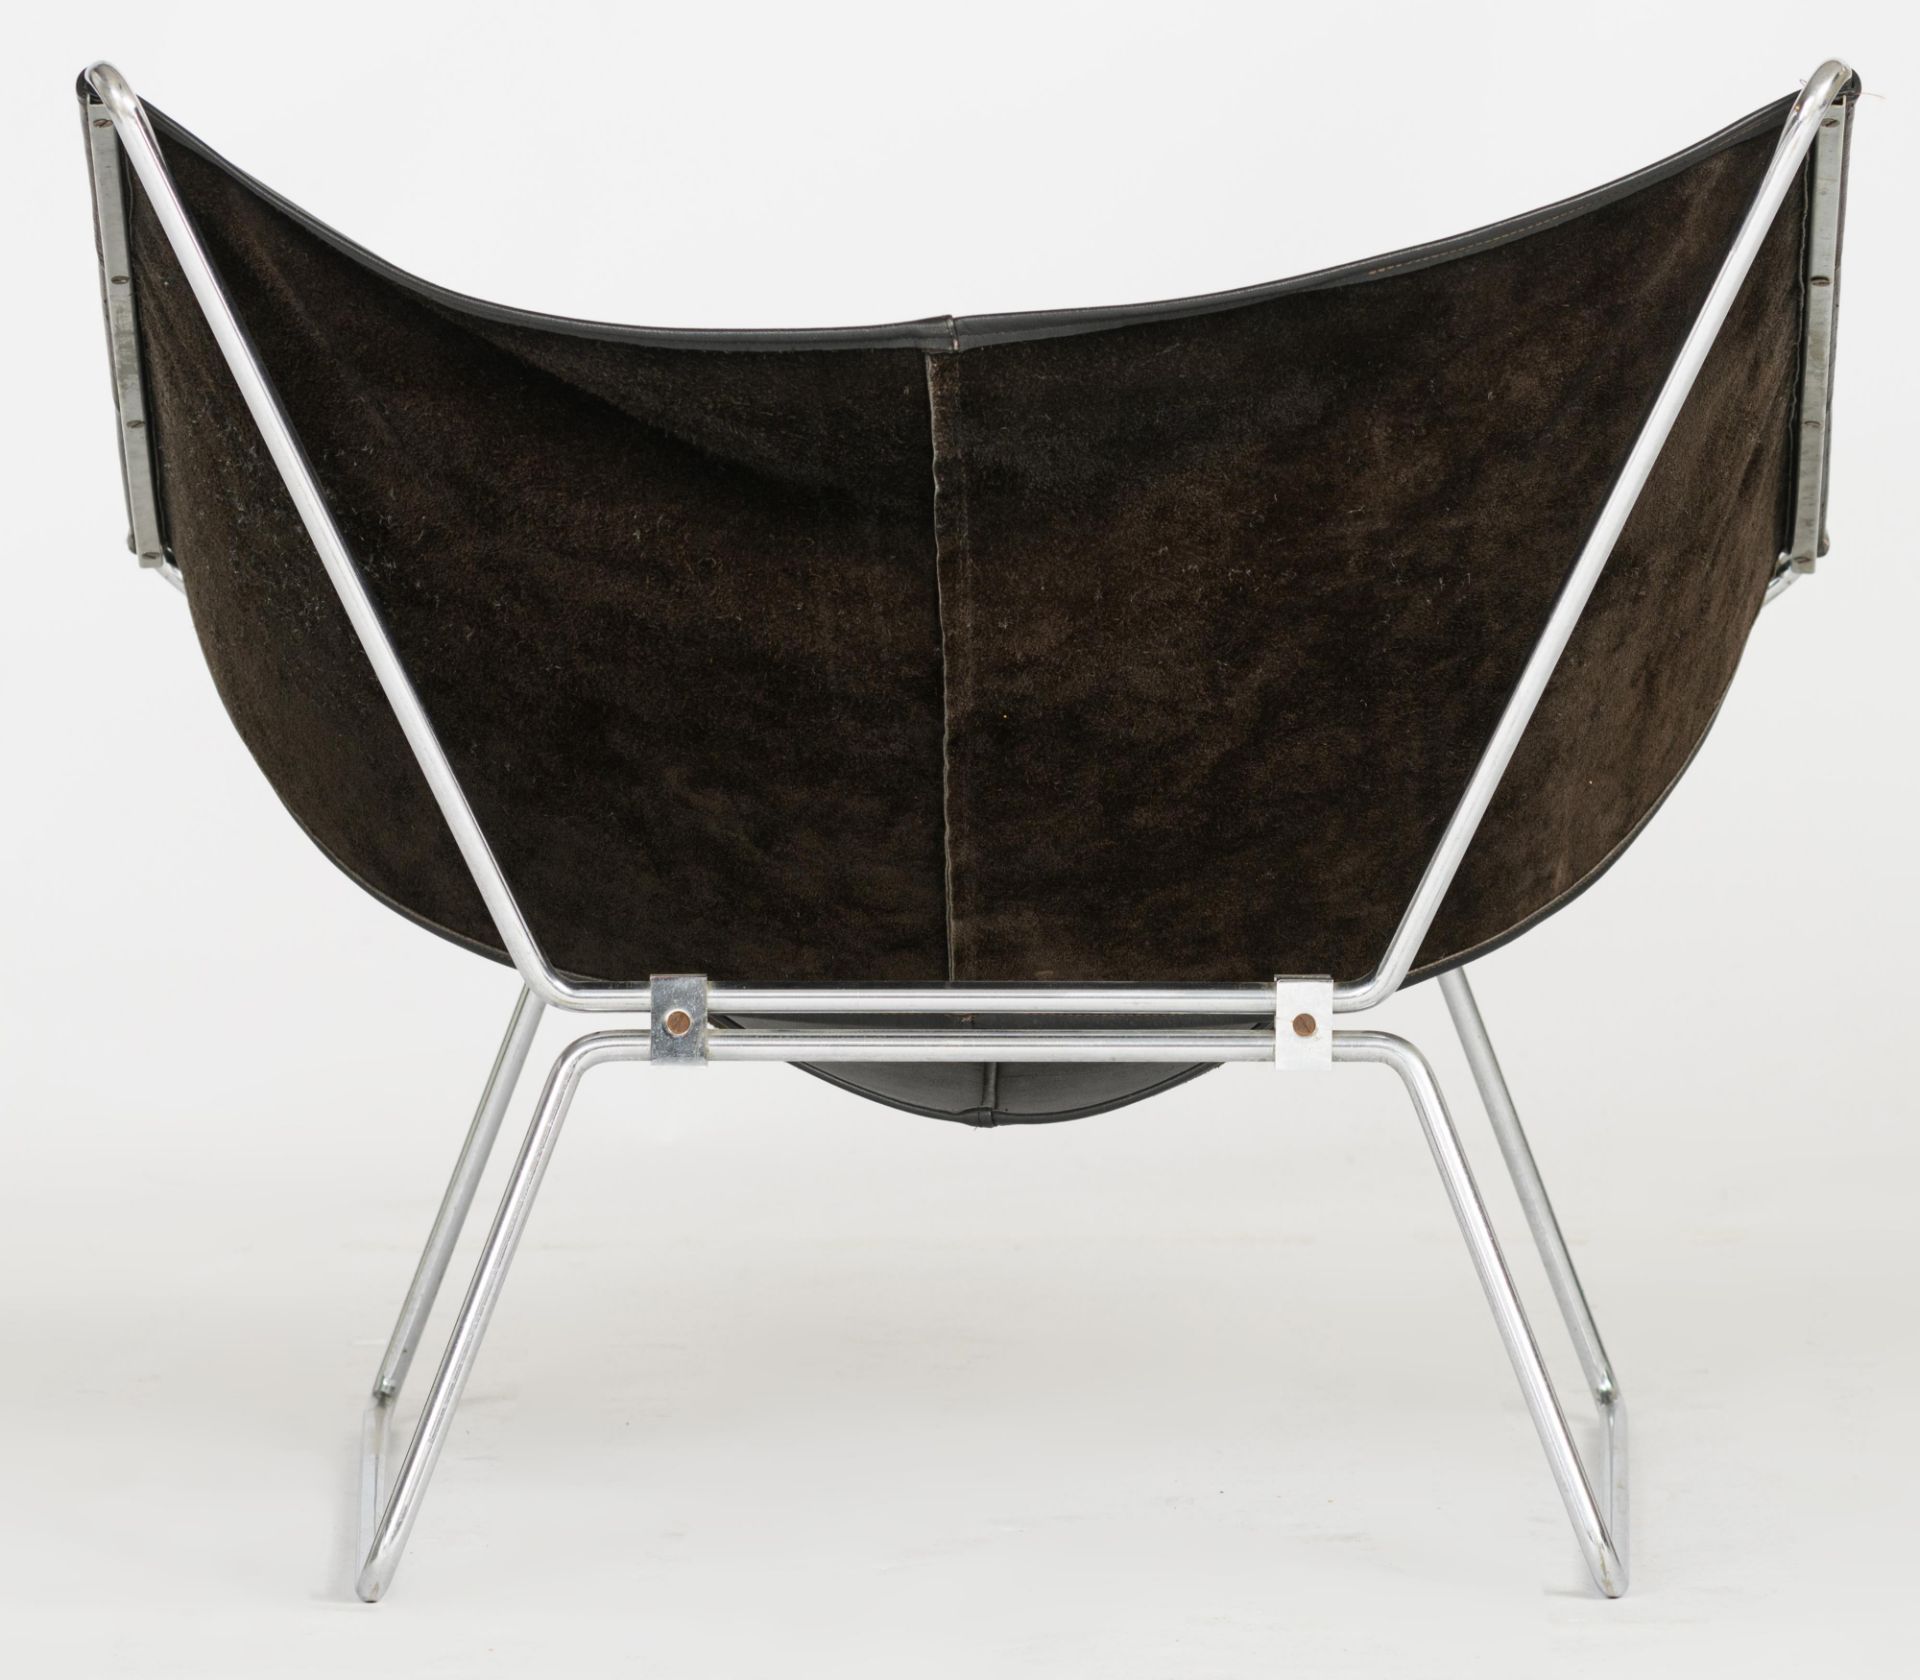 An AP-14 'butterfly' chair by Pierre Paulin for Polak, 1954, H 68,5 - W 77 - D 72 cm - Image 4 of 7